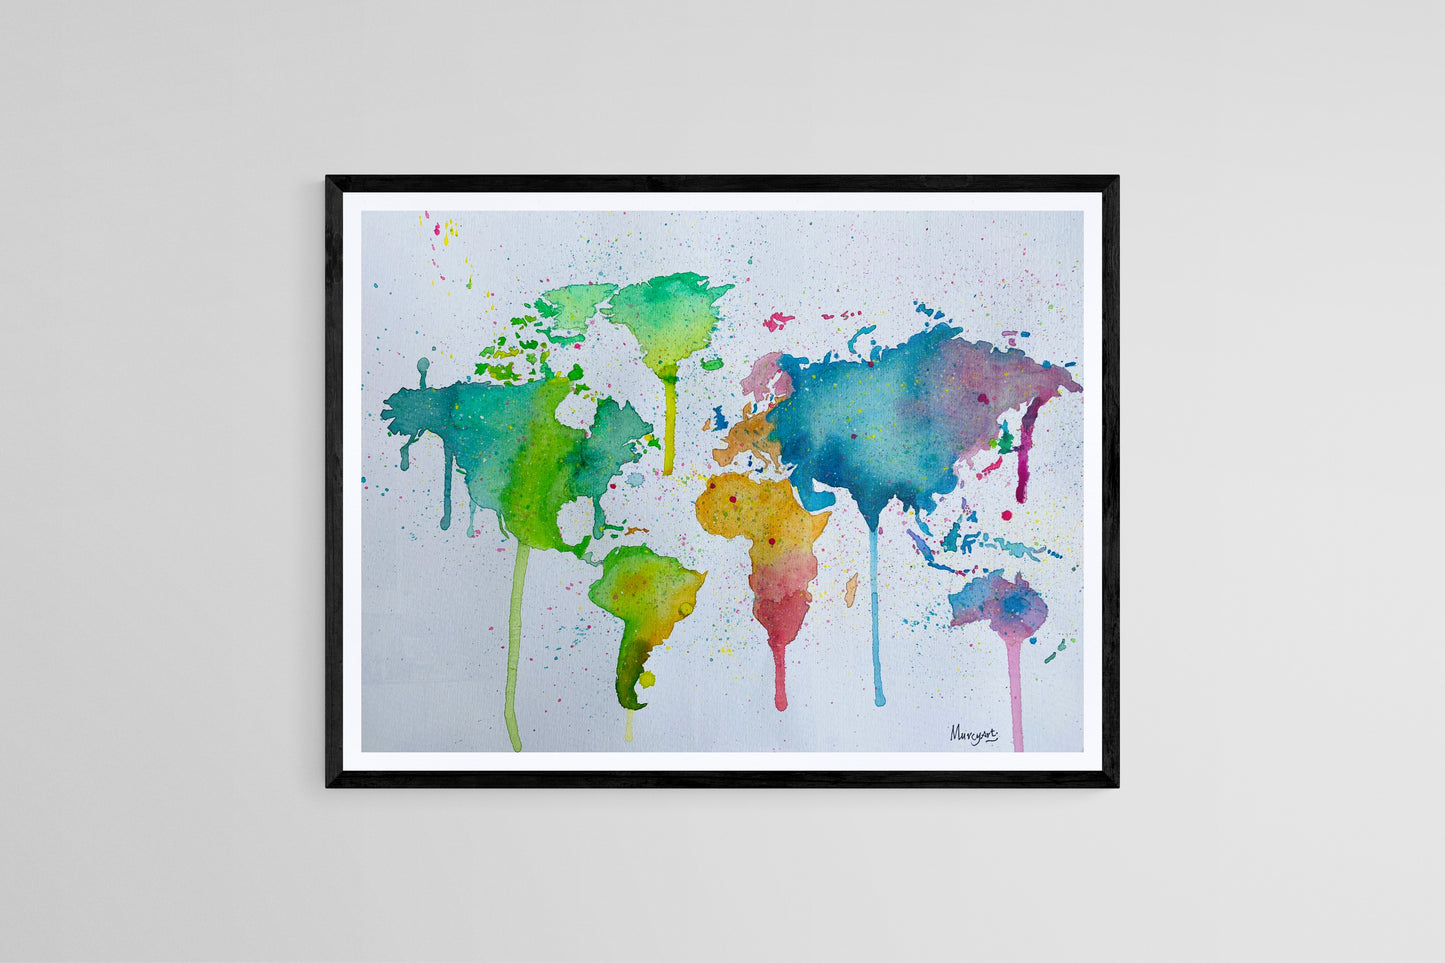 “Abstract World Map”